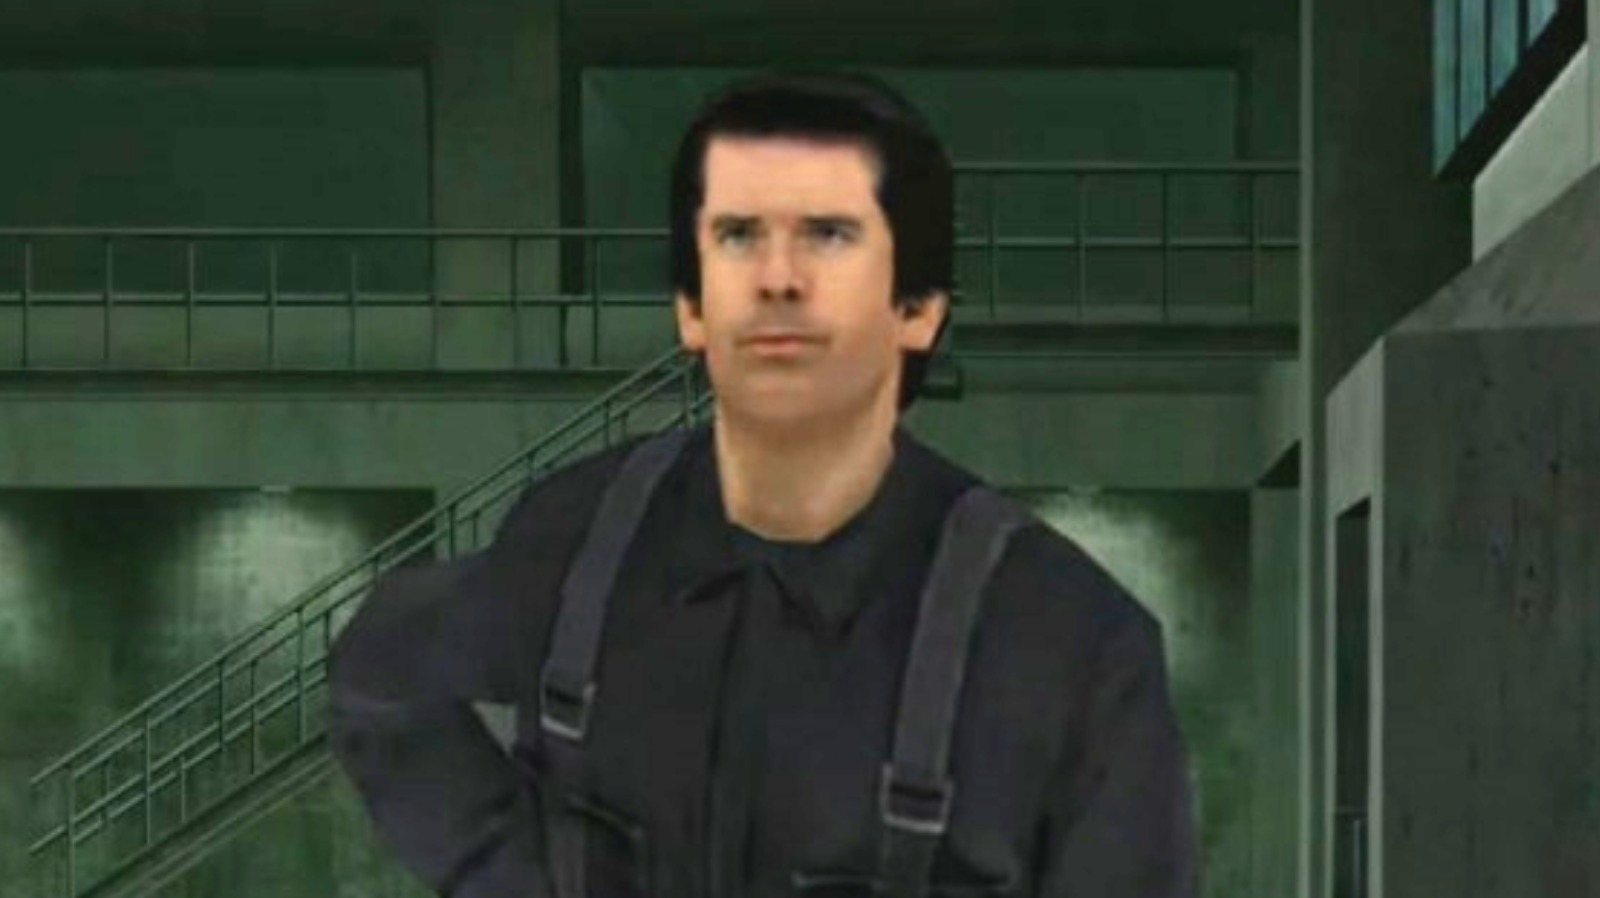 Cancelled Goldeneye 007 Remaster is playable on PC via the X360